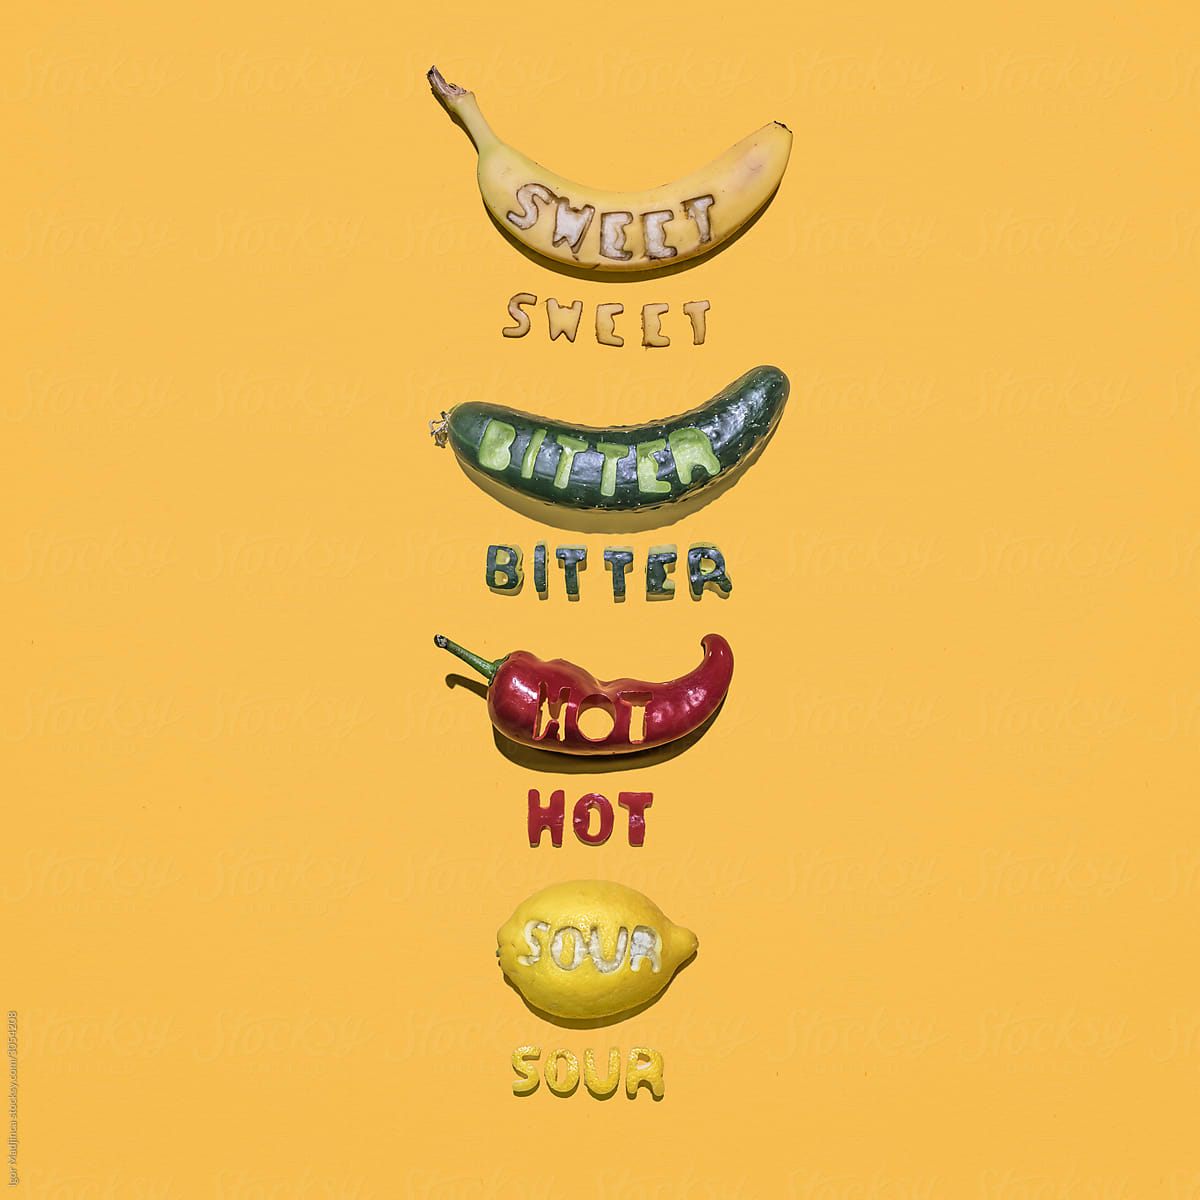 colorful foods with cut-out letters that indicate their taste on the yellow background